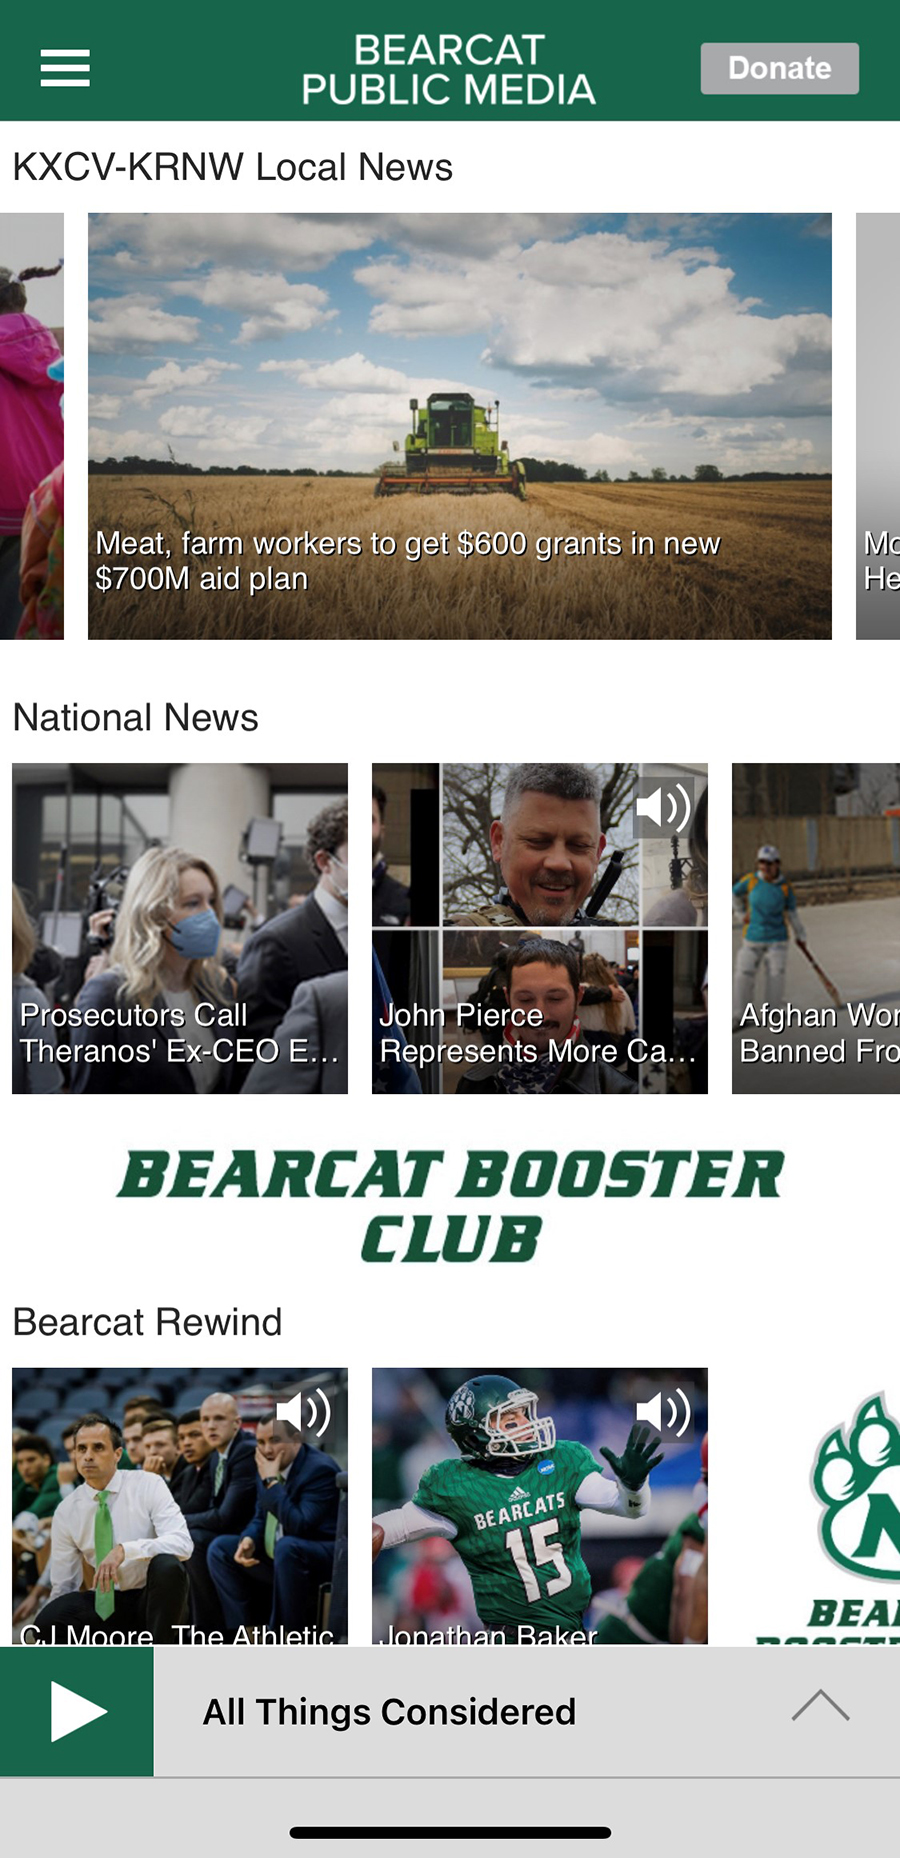 The “Bearcat Public Media App” is available on app stores for all mobile platforms, including android and iOS phones and tablets.